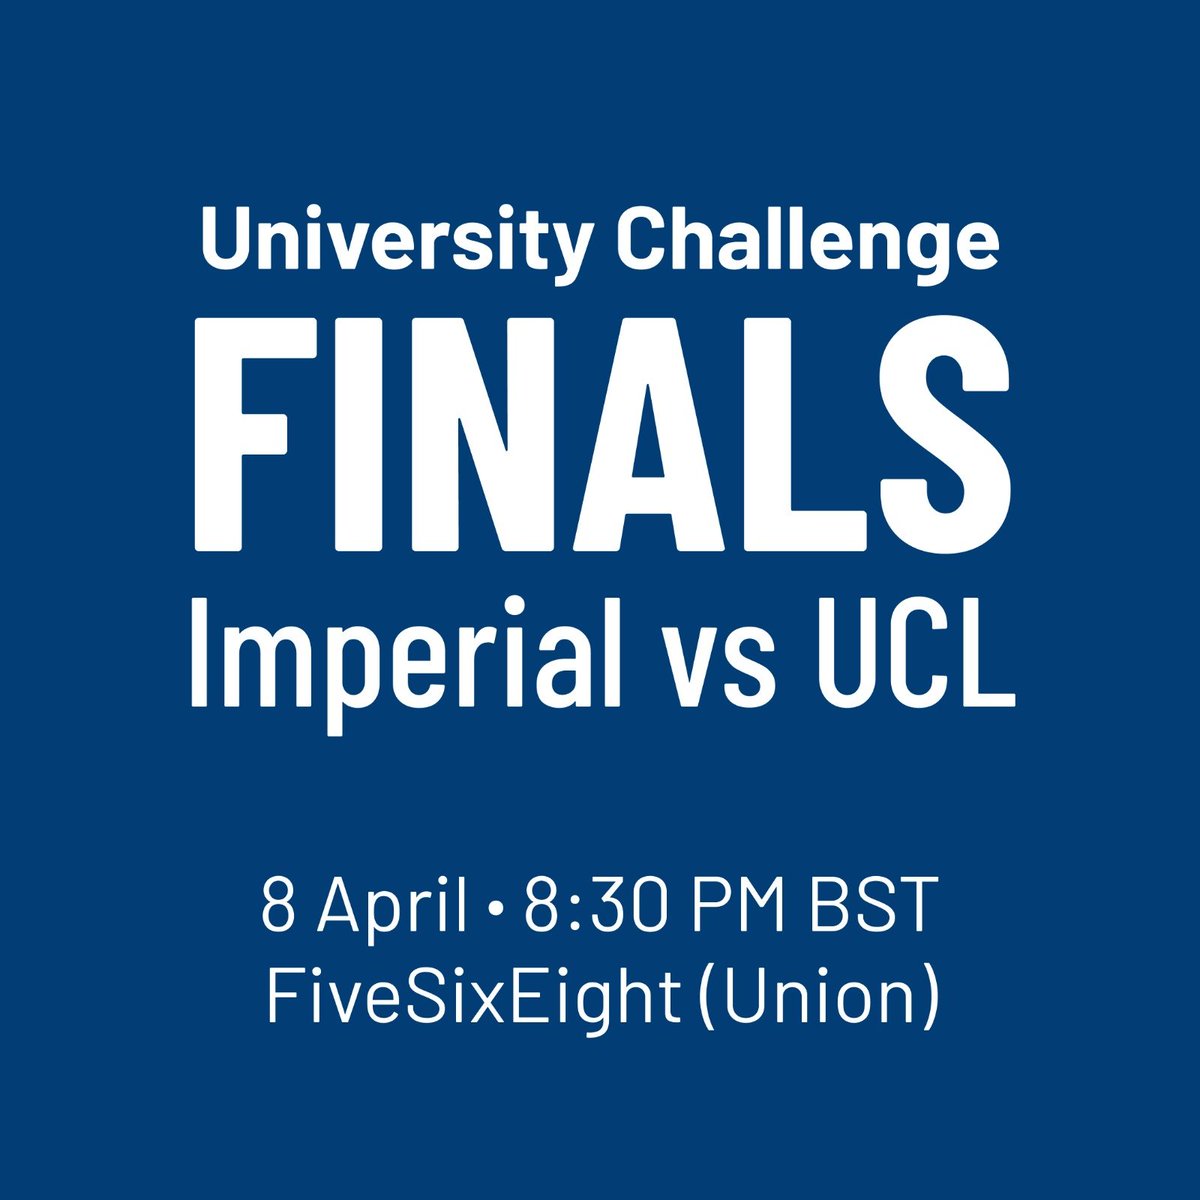 We'll be watching the final of #UniversityChallenge at FiveSixEight at @icunion on 8 April - come along and cheer on the Imperial team!